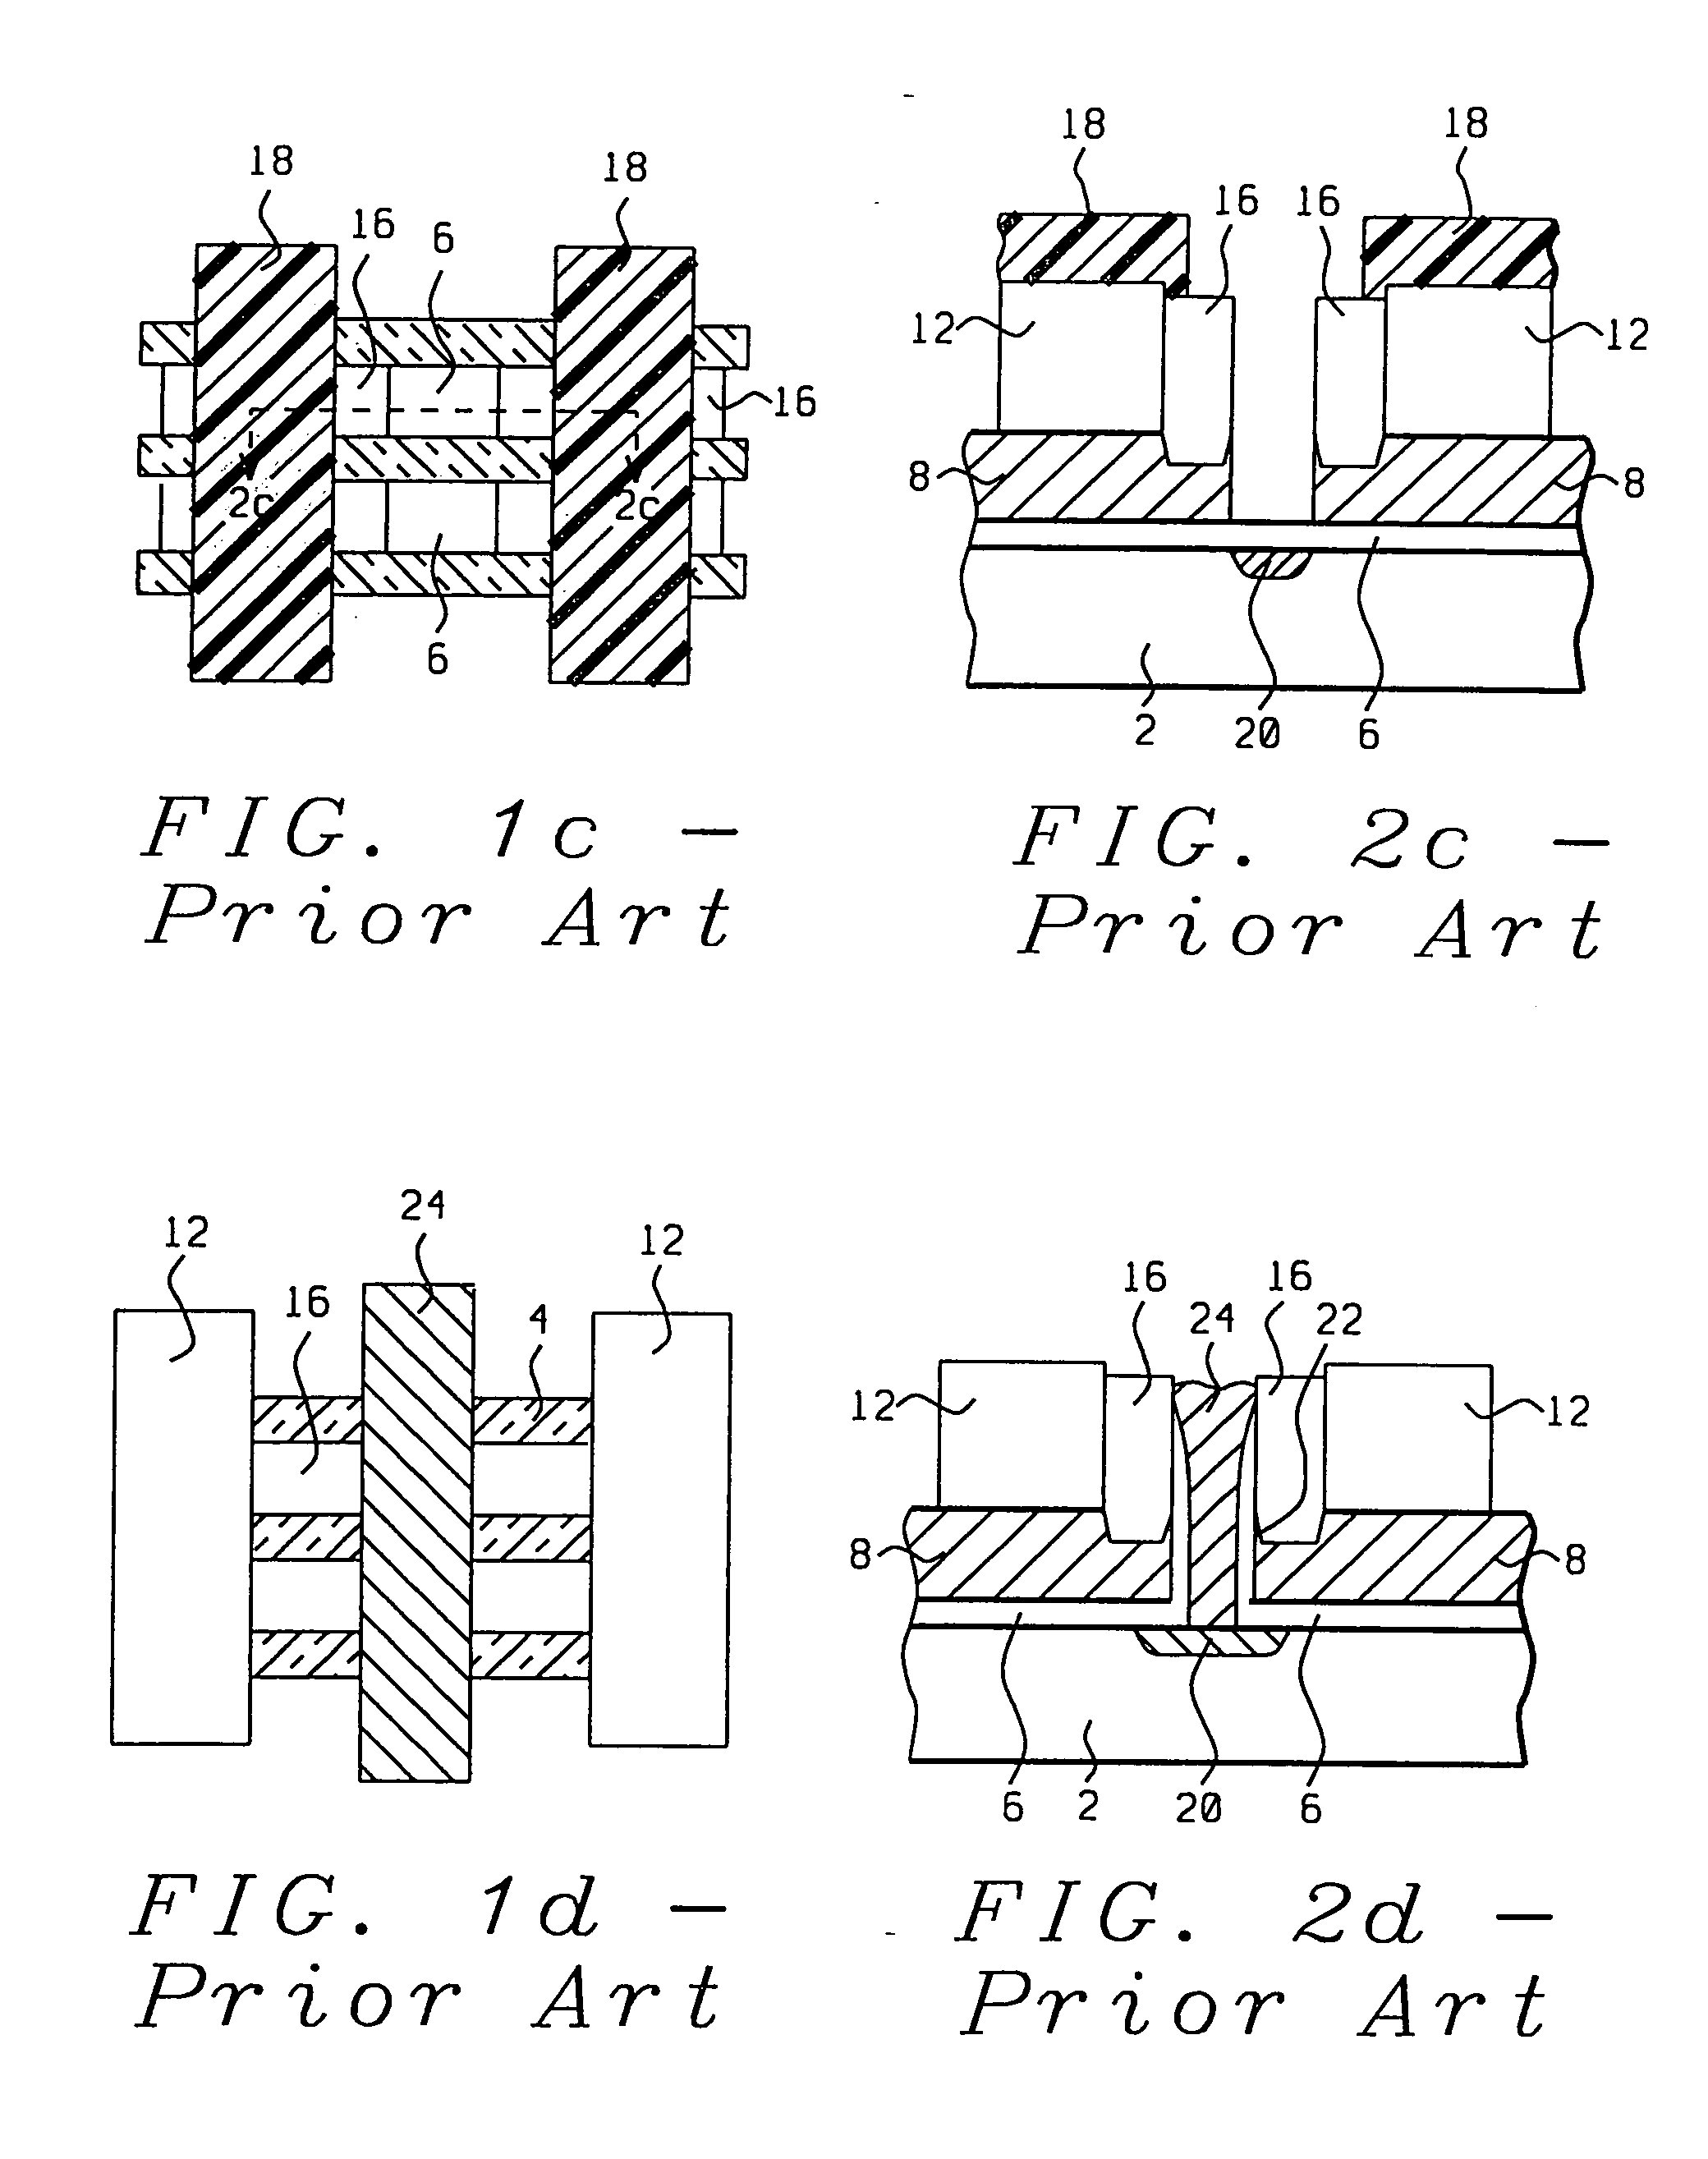 Structure and fabricating method to make a cell with multi-self-alignment in split gate flash